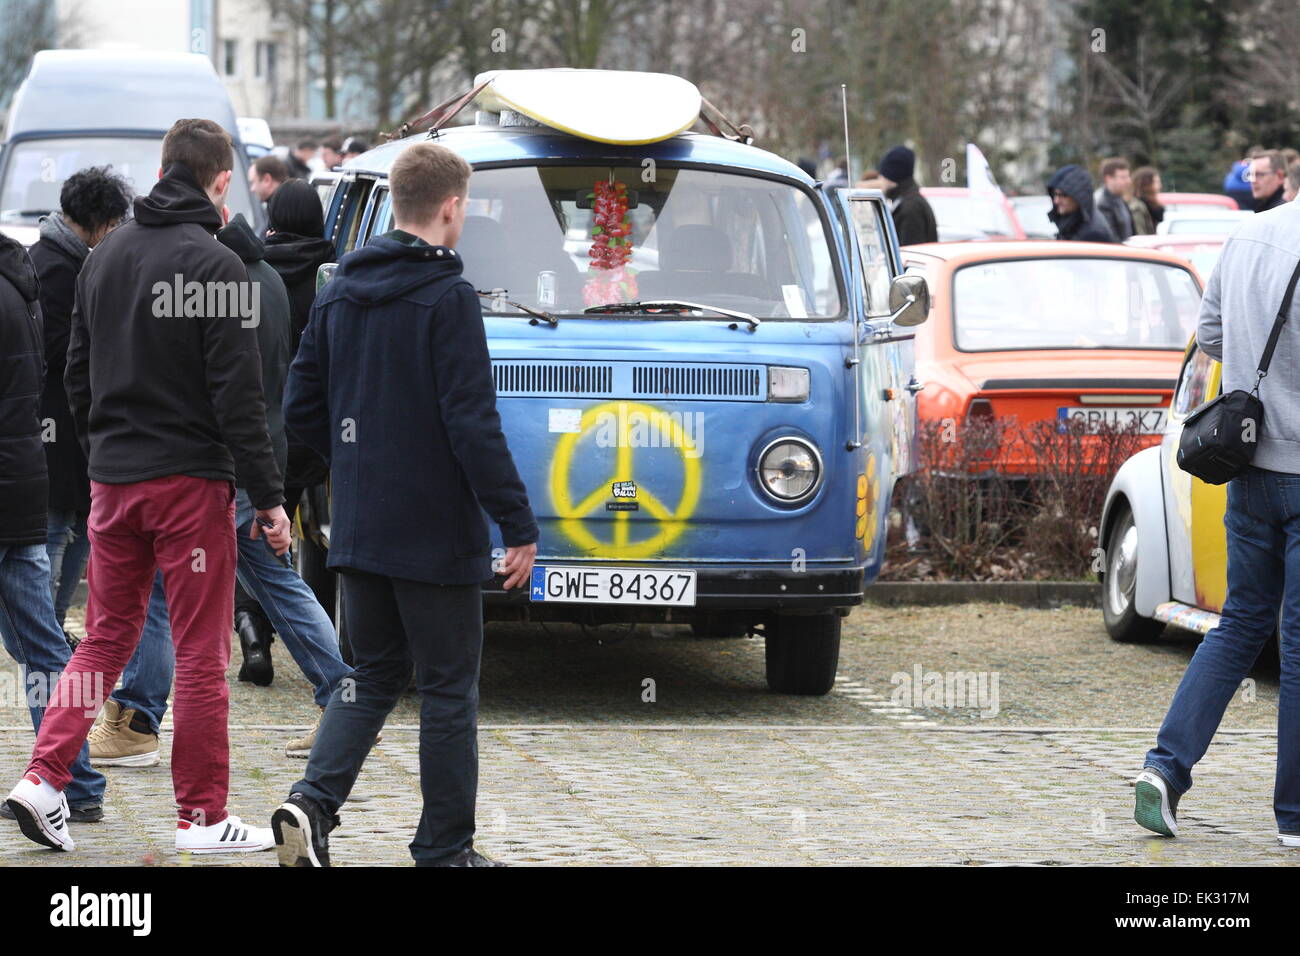 Gdansk, Poland. 6th April, 2015. Classic cars seazon opening in Gdansk. Hundreds of classic cars enthusiast shows their cars , all build before the 1989. Pictured : Volkswagen Tranporter california car Credit:  Michal Fludra/Alamy Live News Stock Photo